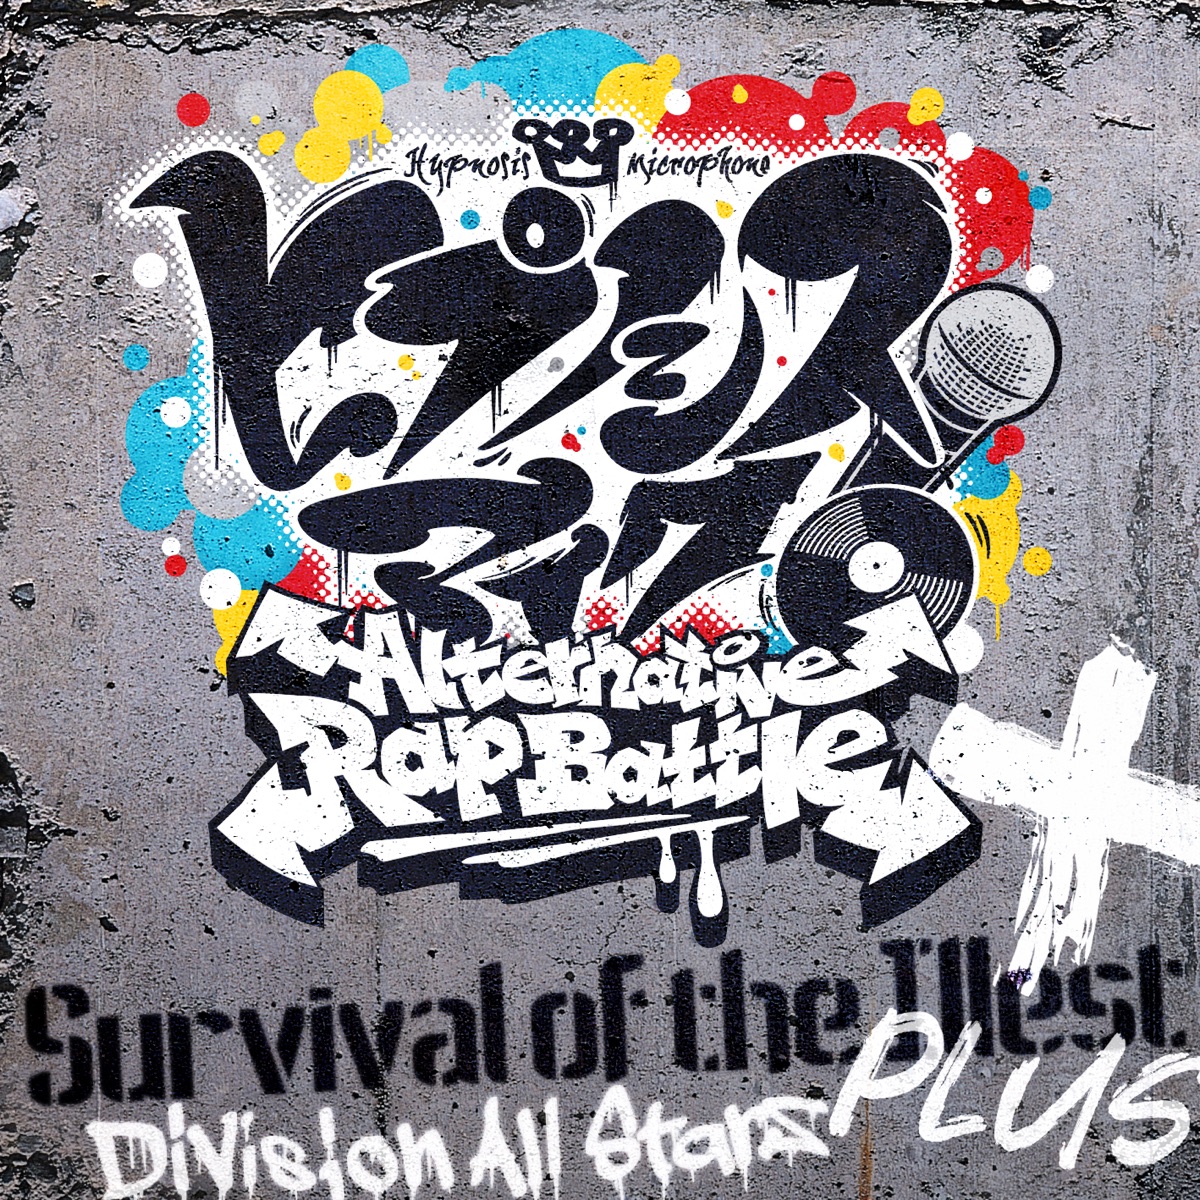 『Division All Stars - Survival of the Illest +』収録の『Survival of the Illest +』ジャケット